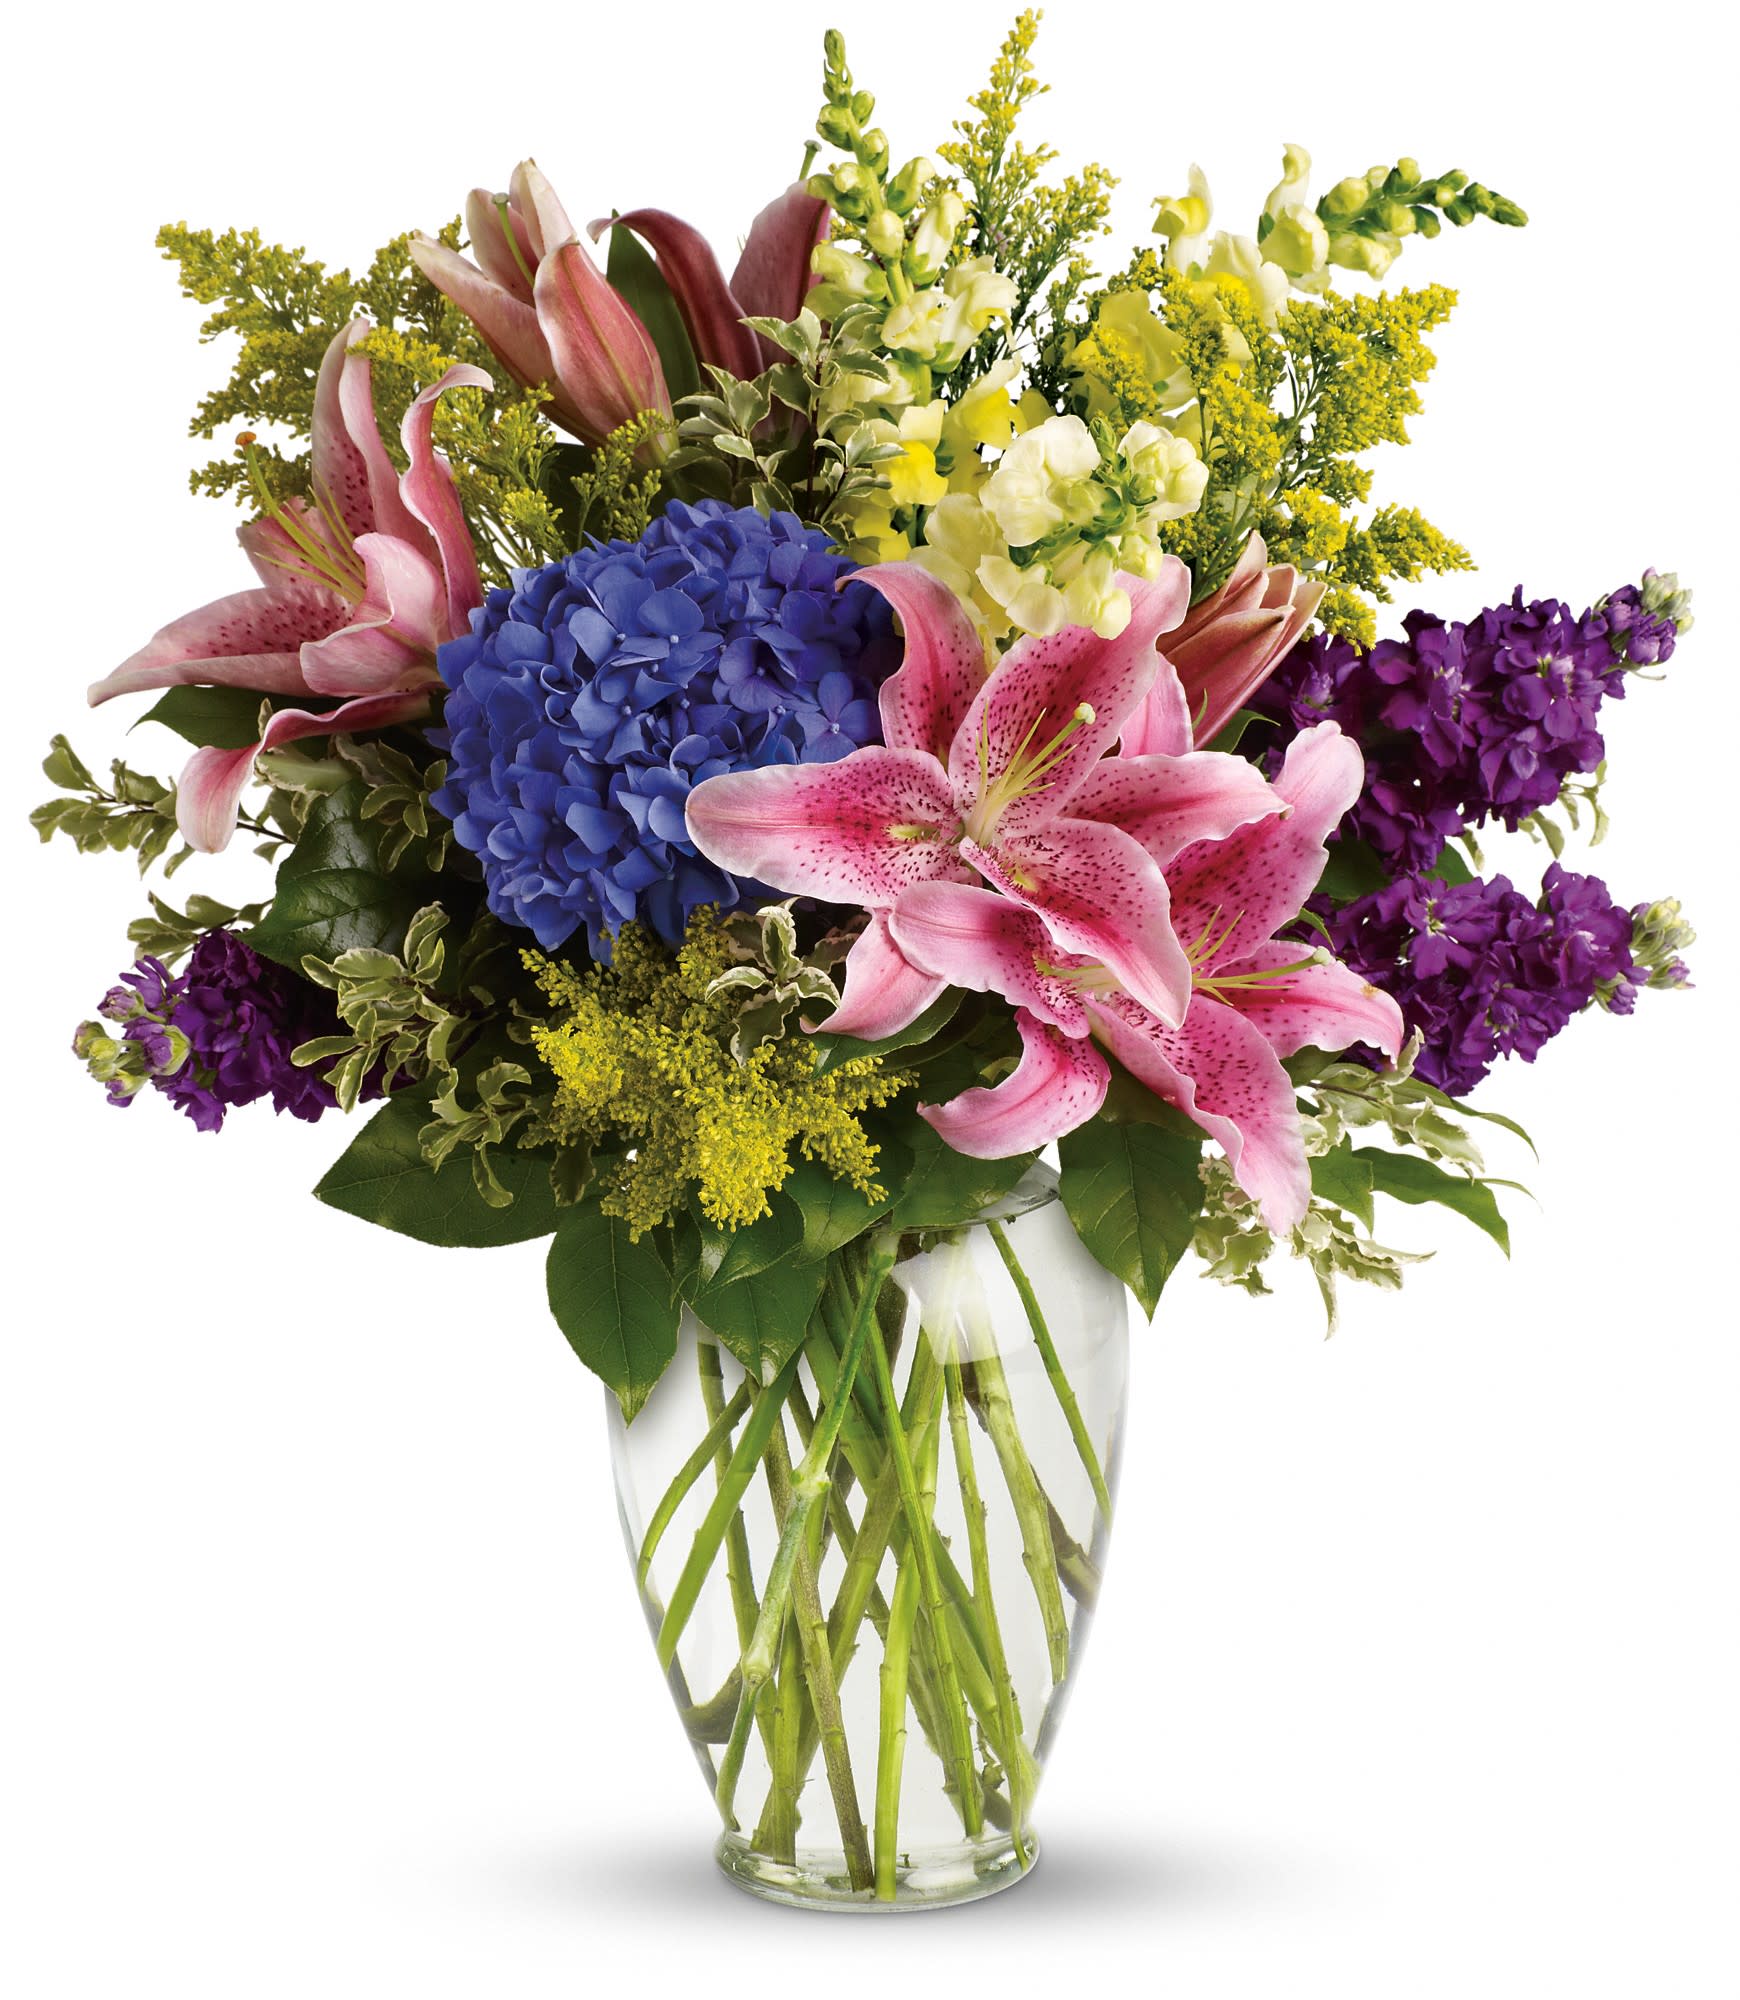 Love Everlasting Bouquet by Teleflora - Let the family at home know you are thinking of them with this lovely bouquet of pink lilies, blue hydrangea and other floral favorites. It will mean a lot. 